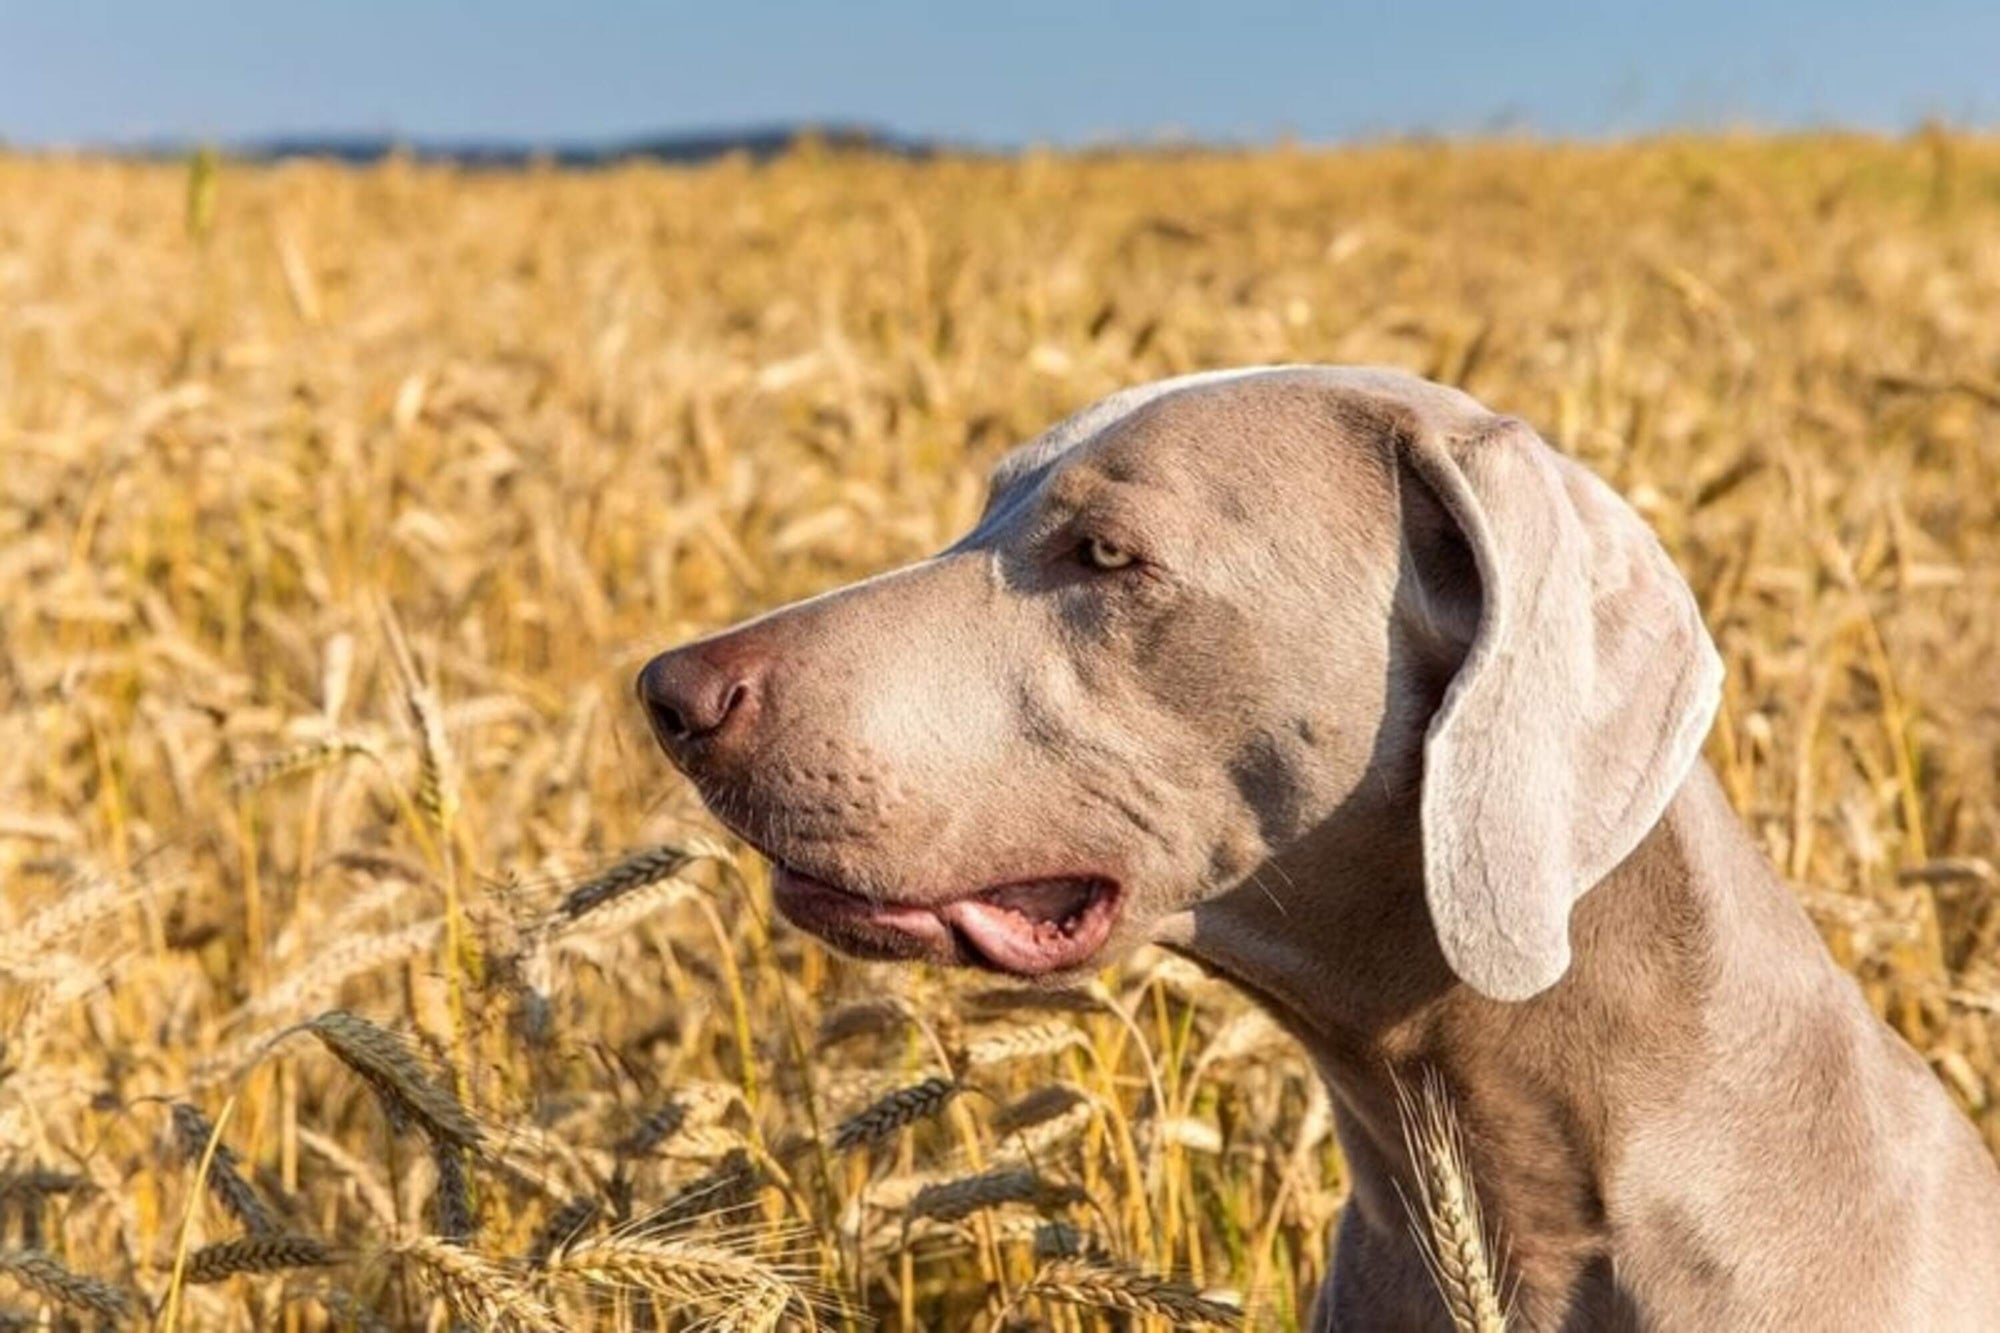 Can Dogs Eat Barley?